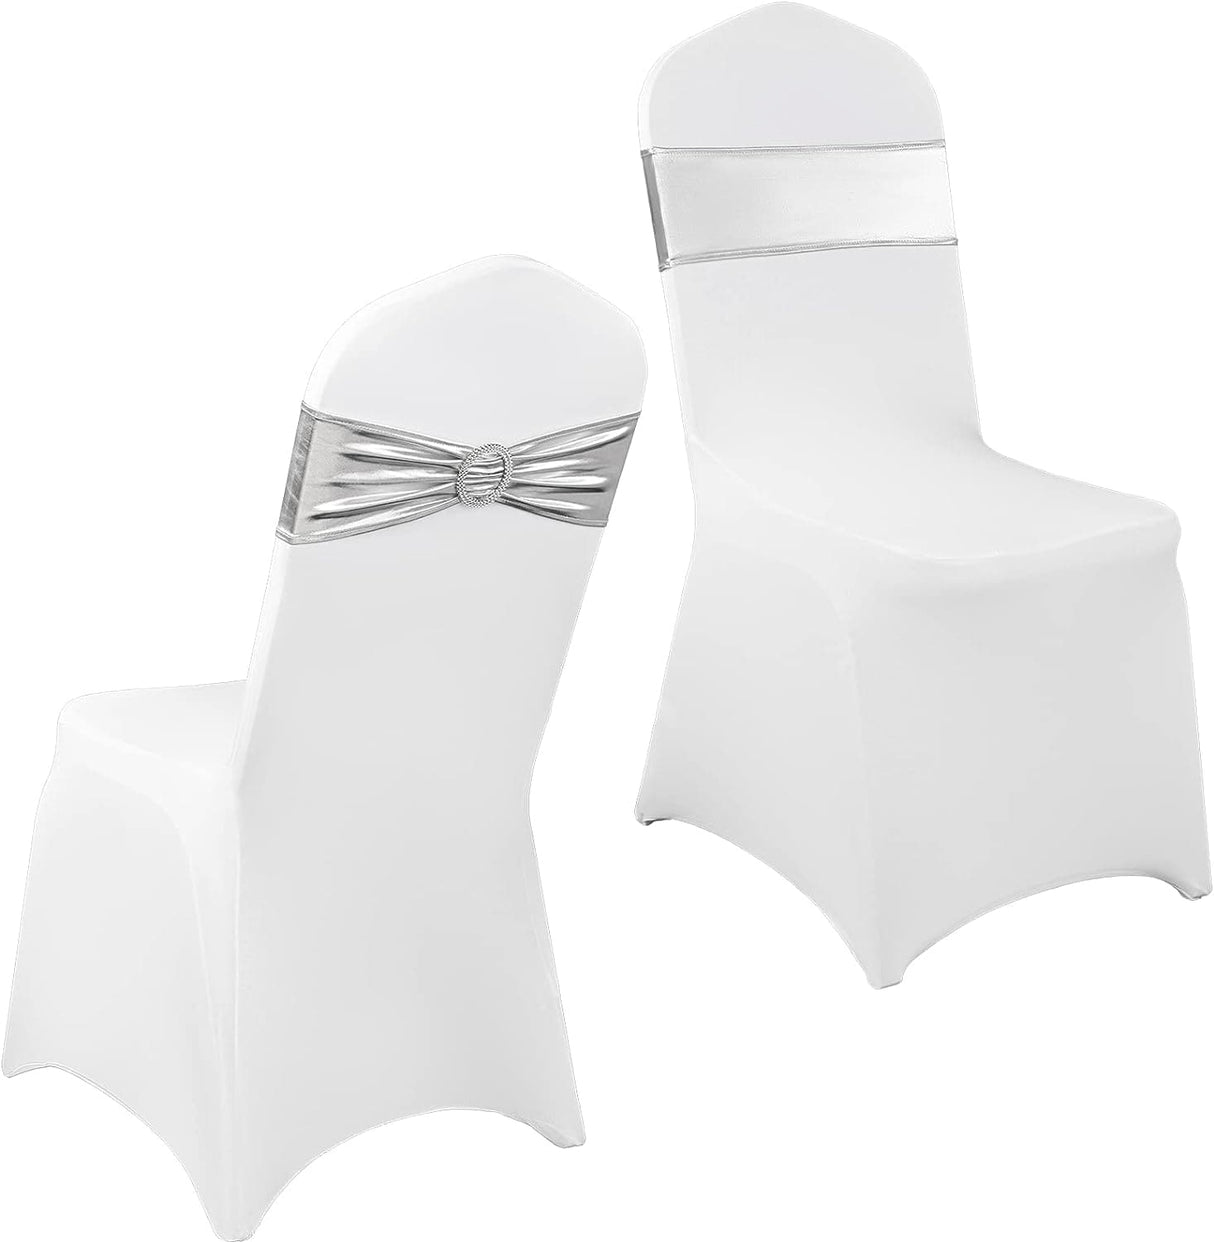 20/ 50PCS Chair Cover Stretch Chair Band with Buckle Elastic Spandex Slider Bow Sashes for Wedding Hotel Banquet Party Banquet Chairs Decoration Home Decor